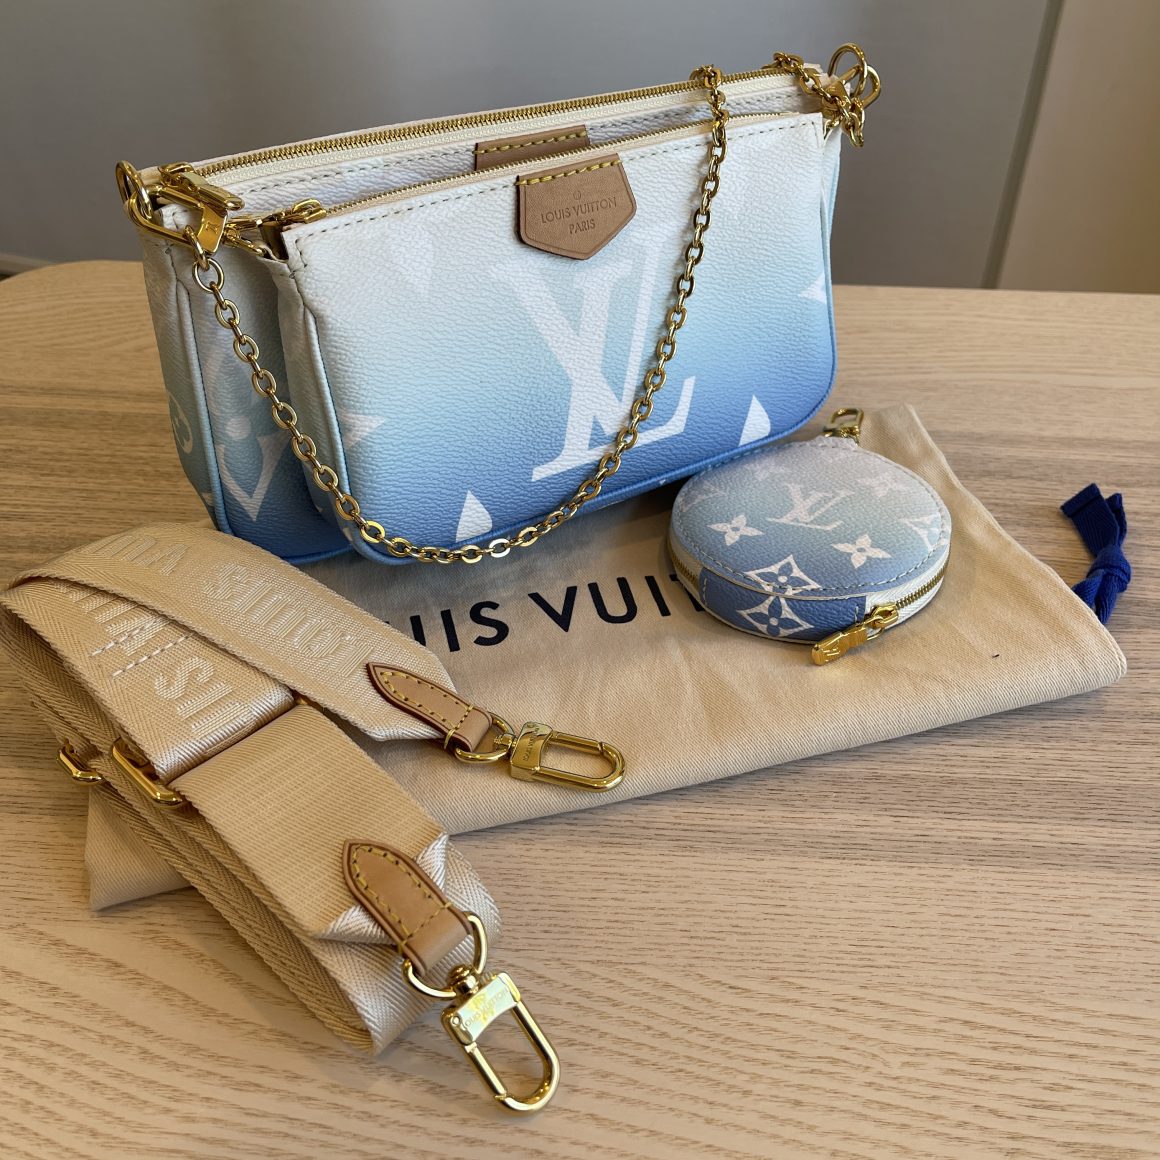 Louis Vuitton Limited Edition Brume Monogram Giant Canvas By the Pool Multi- Pochette Accessories Bag - Yoogi's Closet